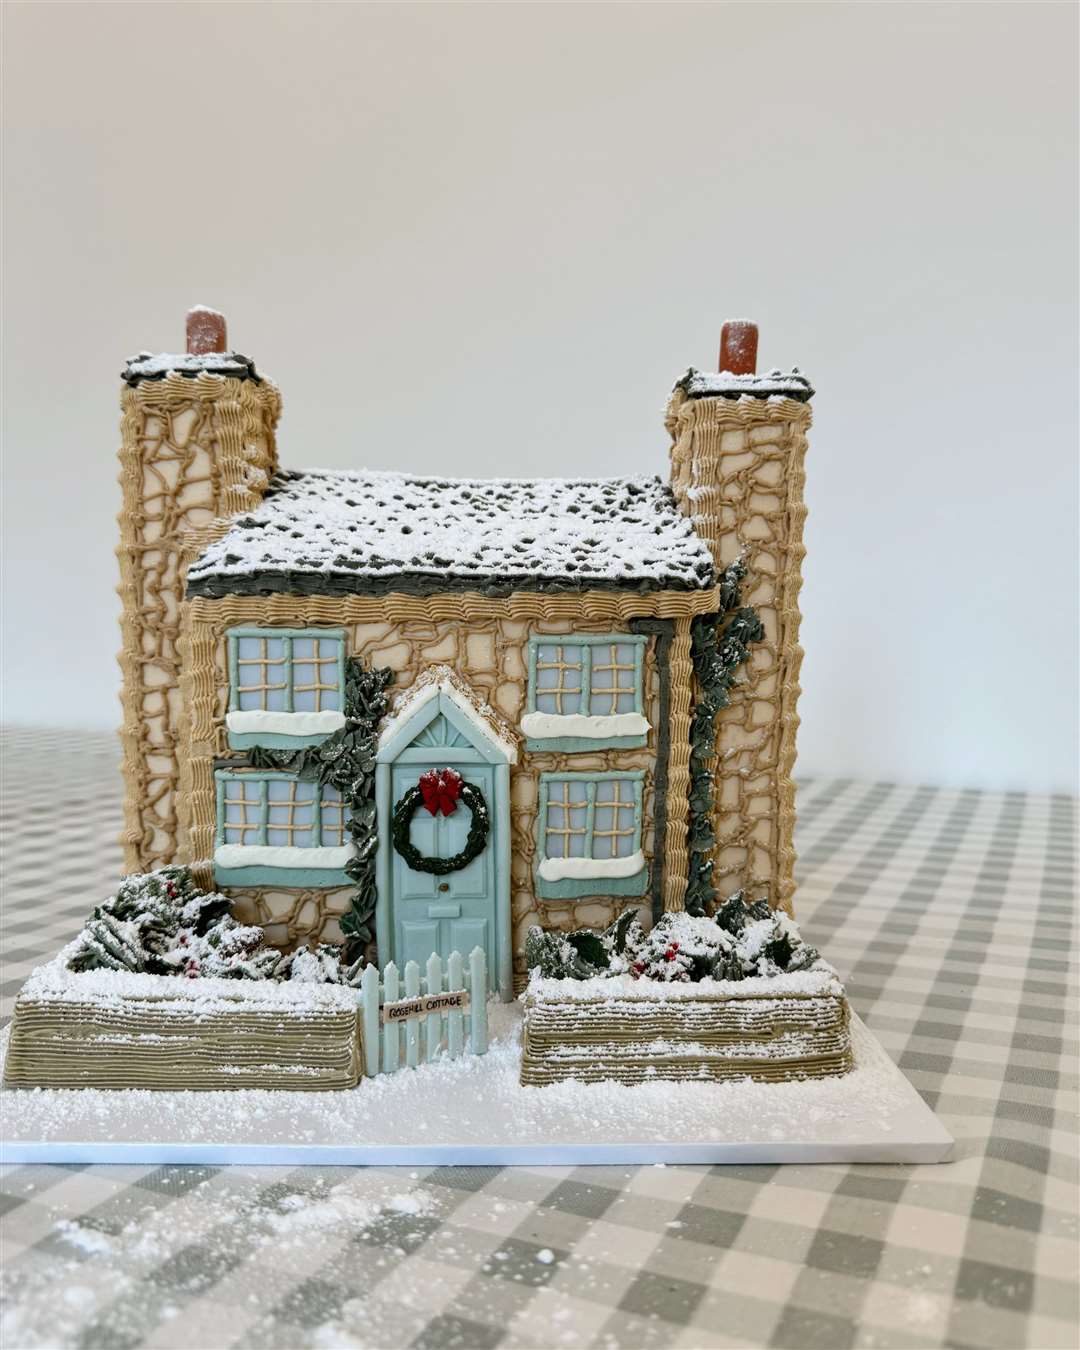 Bridie West said it took around one day and a half to bake and decorate her Rosehill Cottage cake (Bridie West/PA)